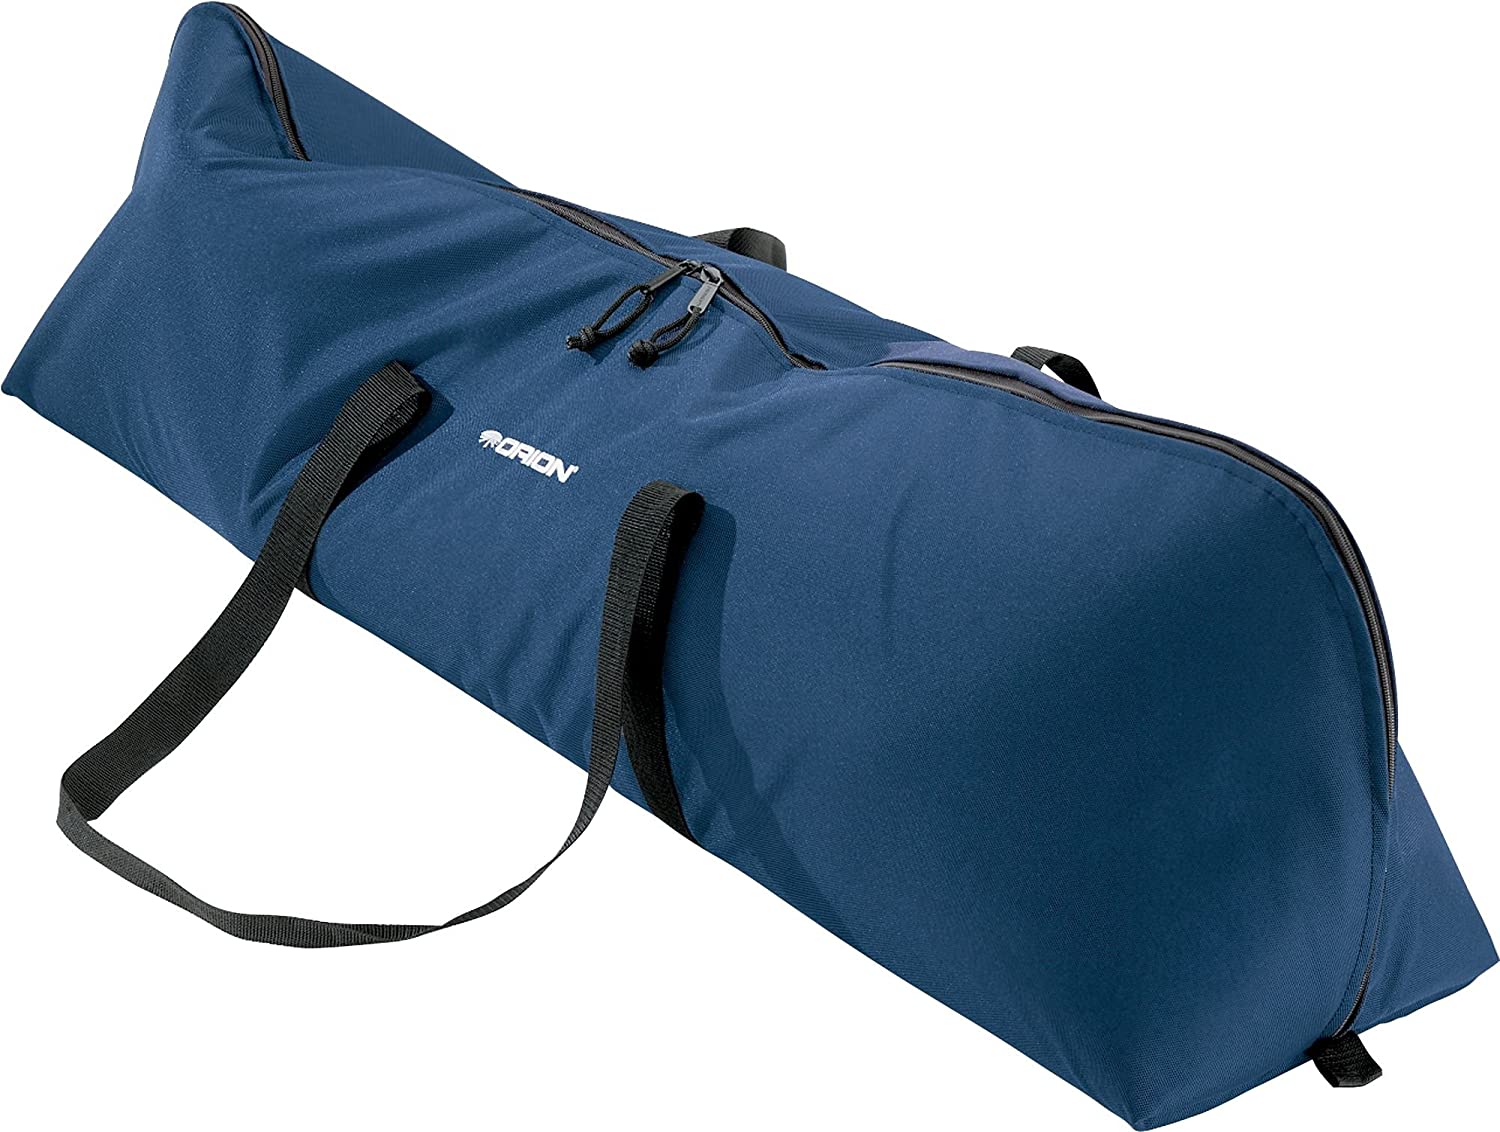 Orion 15164 47x11x14 - Inches Padded Telescope Case